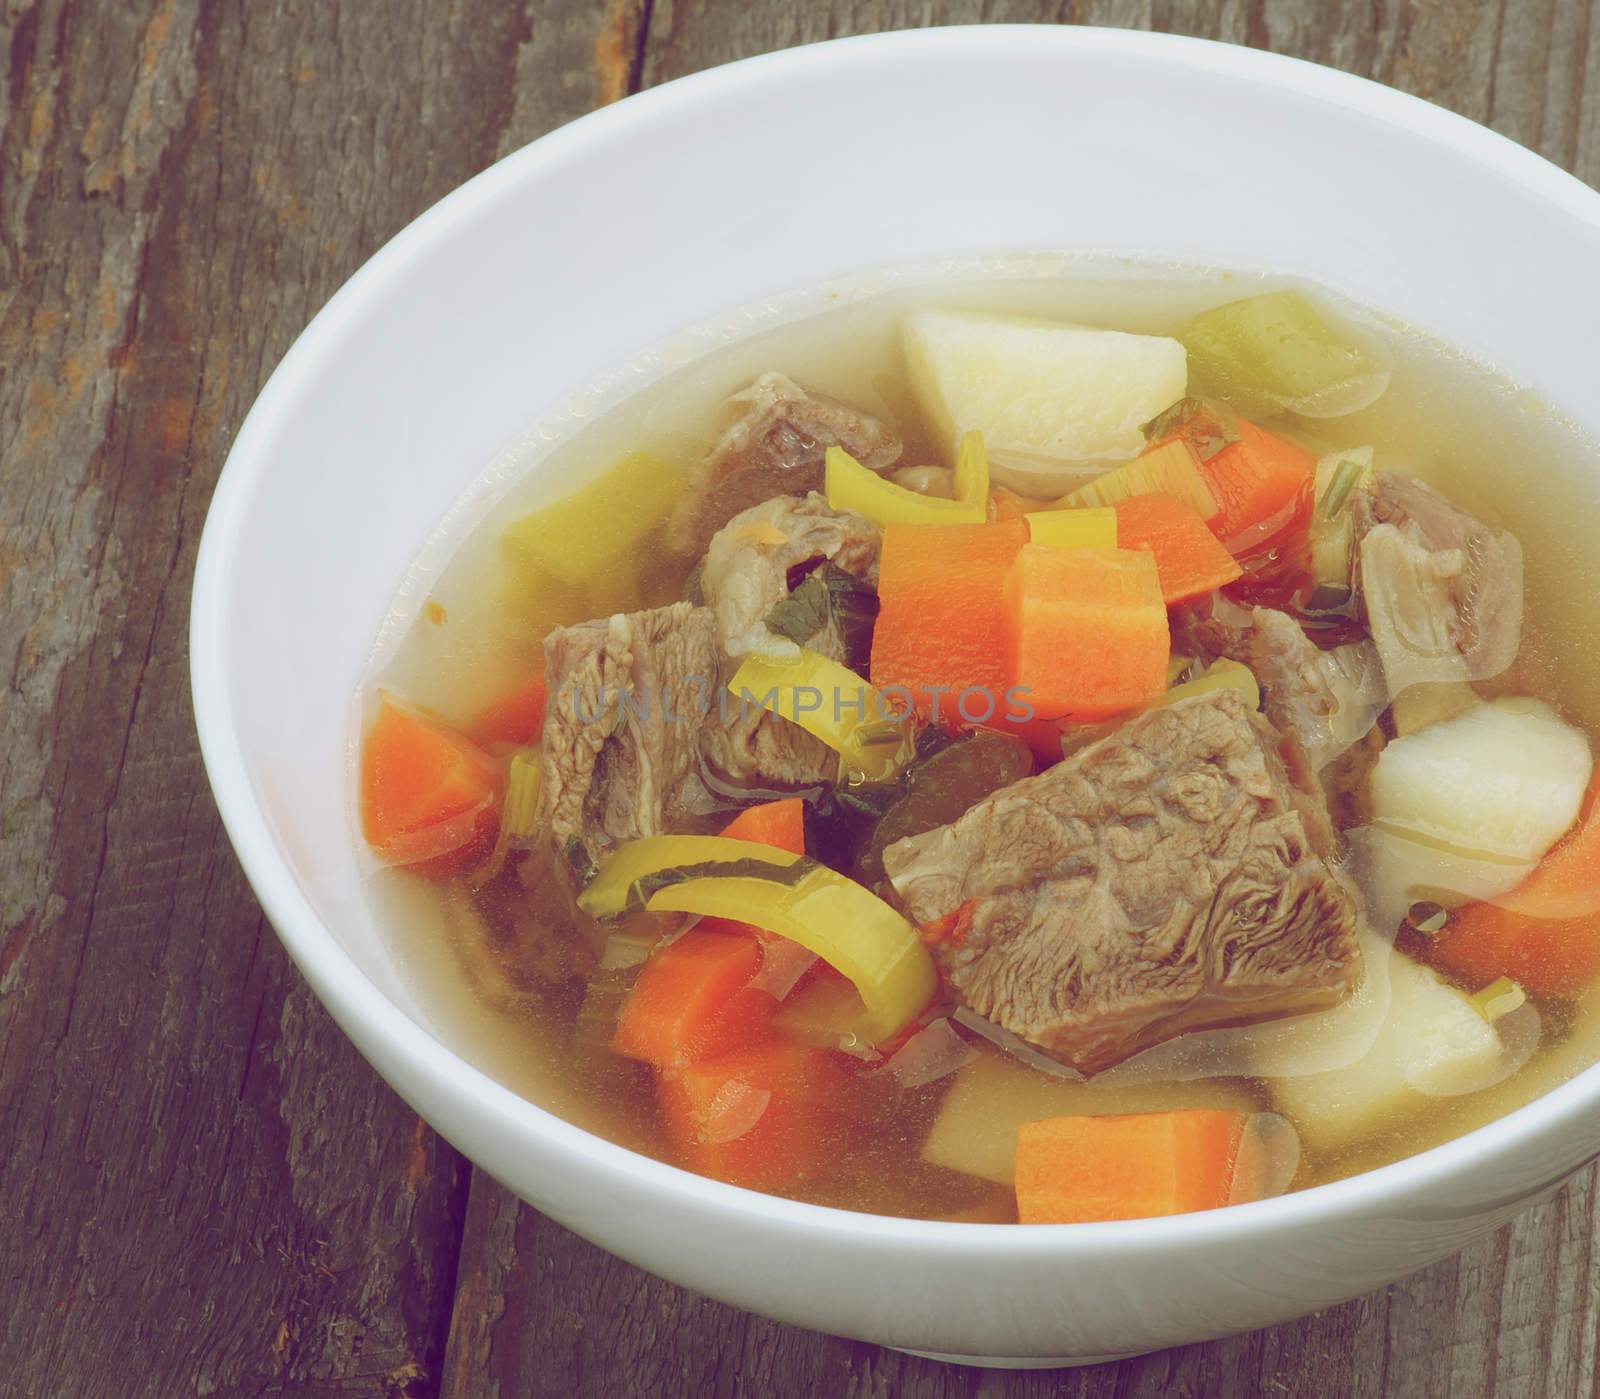 Rustic Beef Soup with Potato, Carrot, Leek and Greens in White Bowl Cross Section on Wooden background. Retro Styled